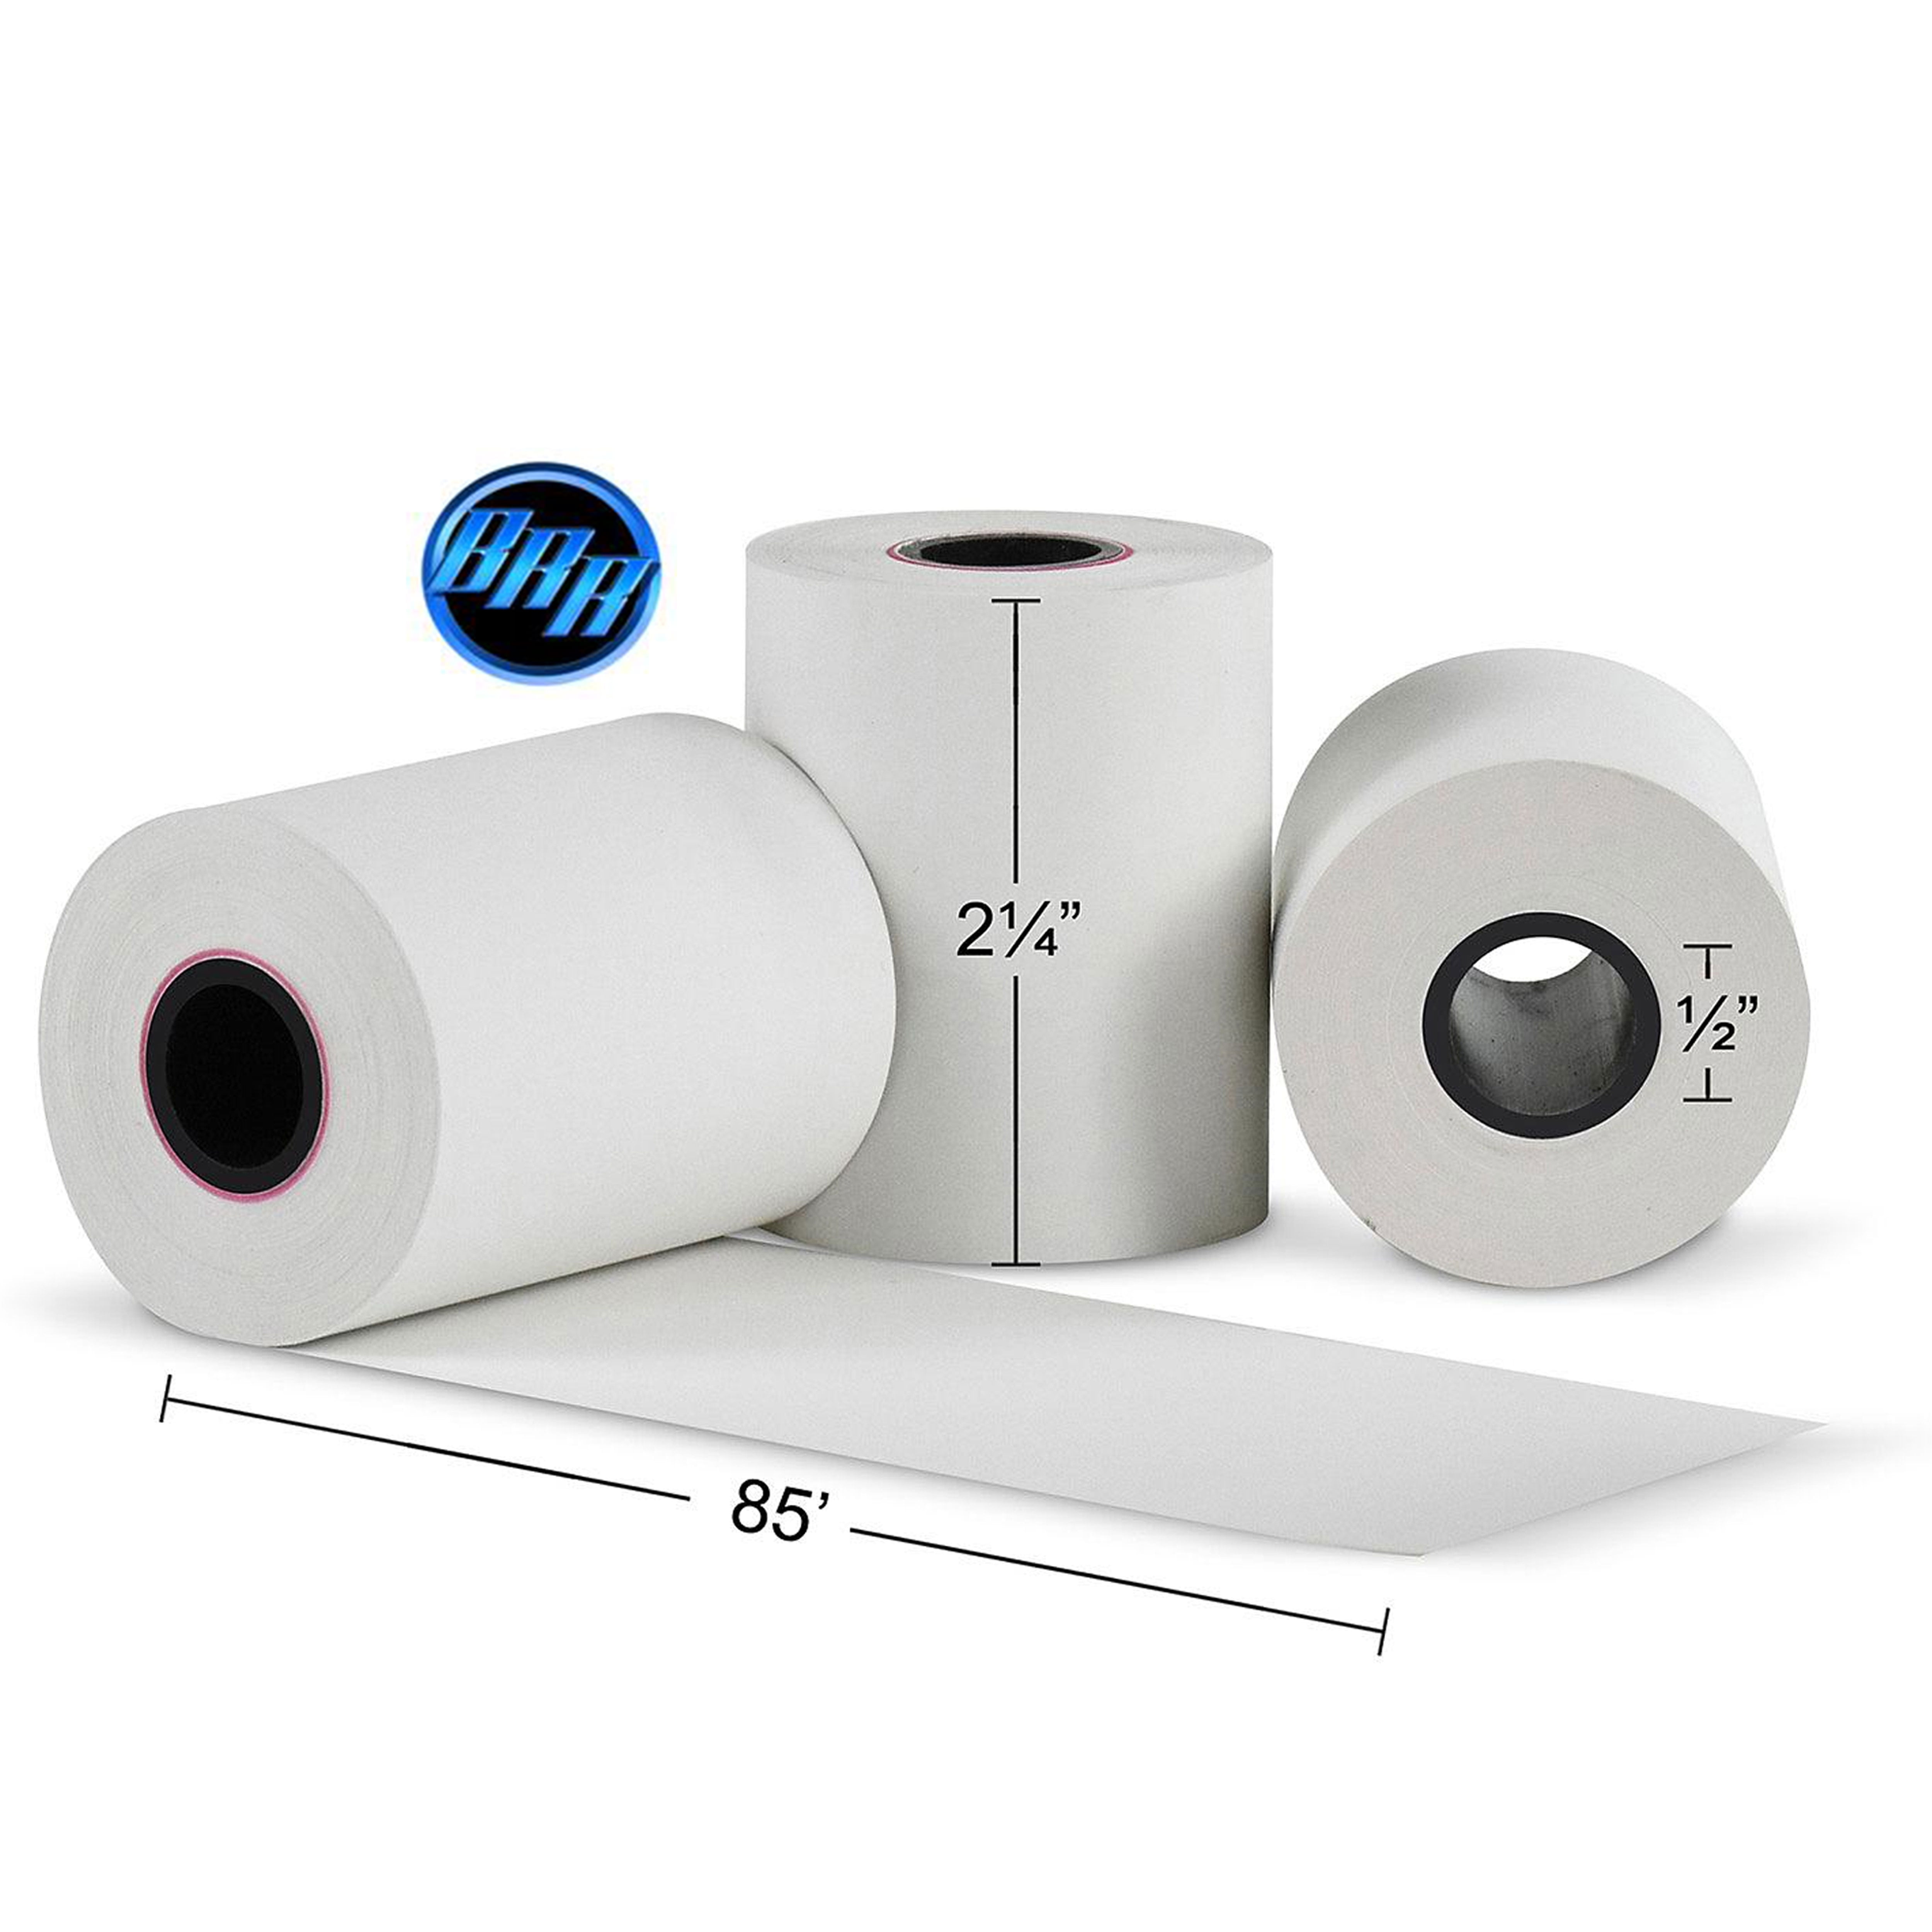 200 2-1/4" x 85' THERMAL PAPER ROLLS  ~FREE SHIPPING~ CLOVER MINI / MOBILE 